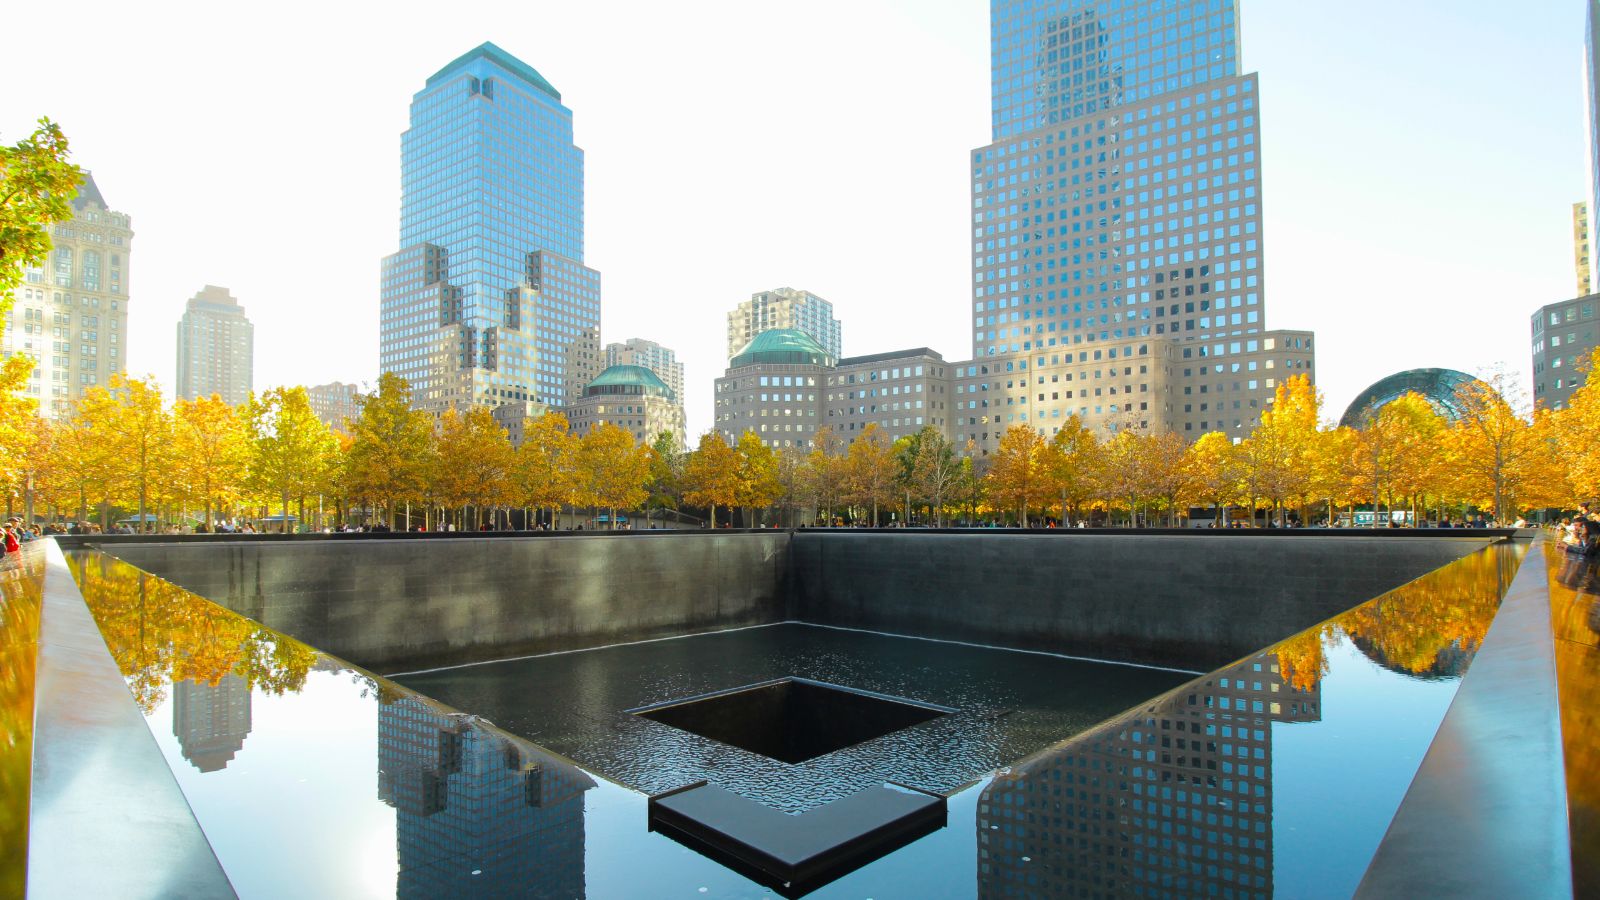 <p>Recommended by 58% of visitors</p><p>The 9/11 Memorial in New York City is a poignant tribute to the 3,000 people killed in the terror attacks of 2001. Its focal points are two large pools, representing the footprints of the Twin Towers, featuring North America’s largest artificial waterfalls. The Memorial Plaza is home to over 400 swamp white oak trees and the Survivor Tree, a symbol of resilience. The 9/11 Memorial Glade honors those affected by exposure to toxins post-9/11. It features a pathway lined with monoliths inlaid with World Trade Center steel, symbolizing strength through adversity.</p>